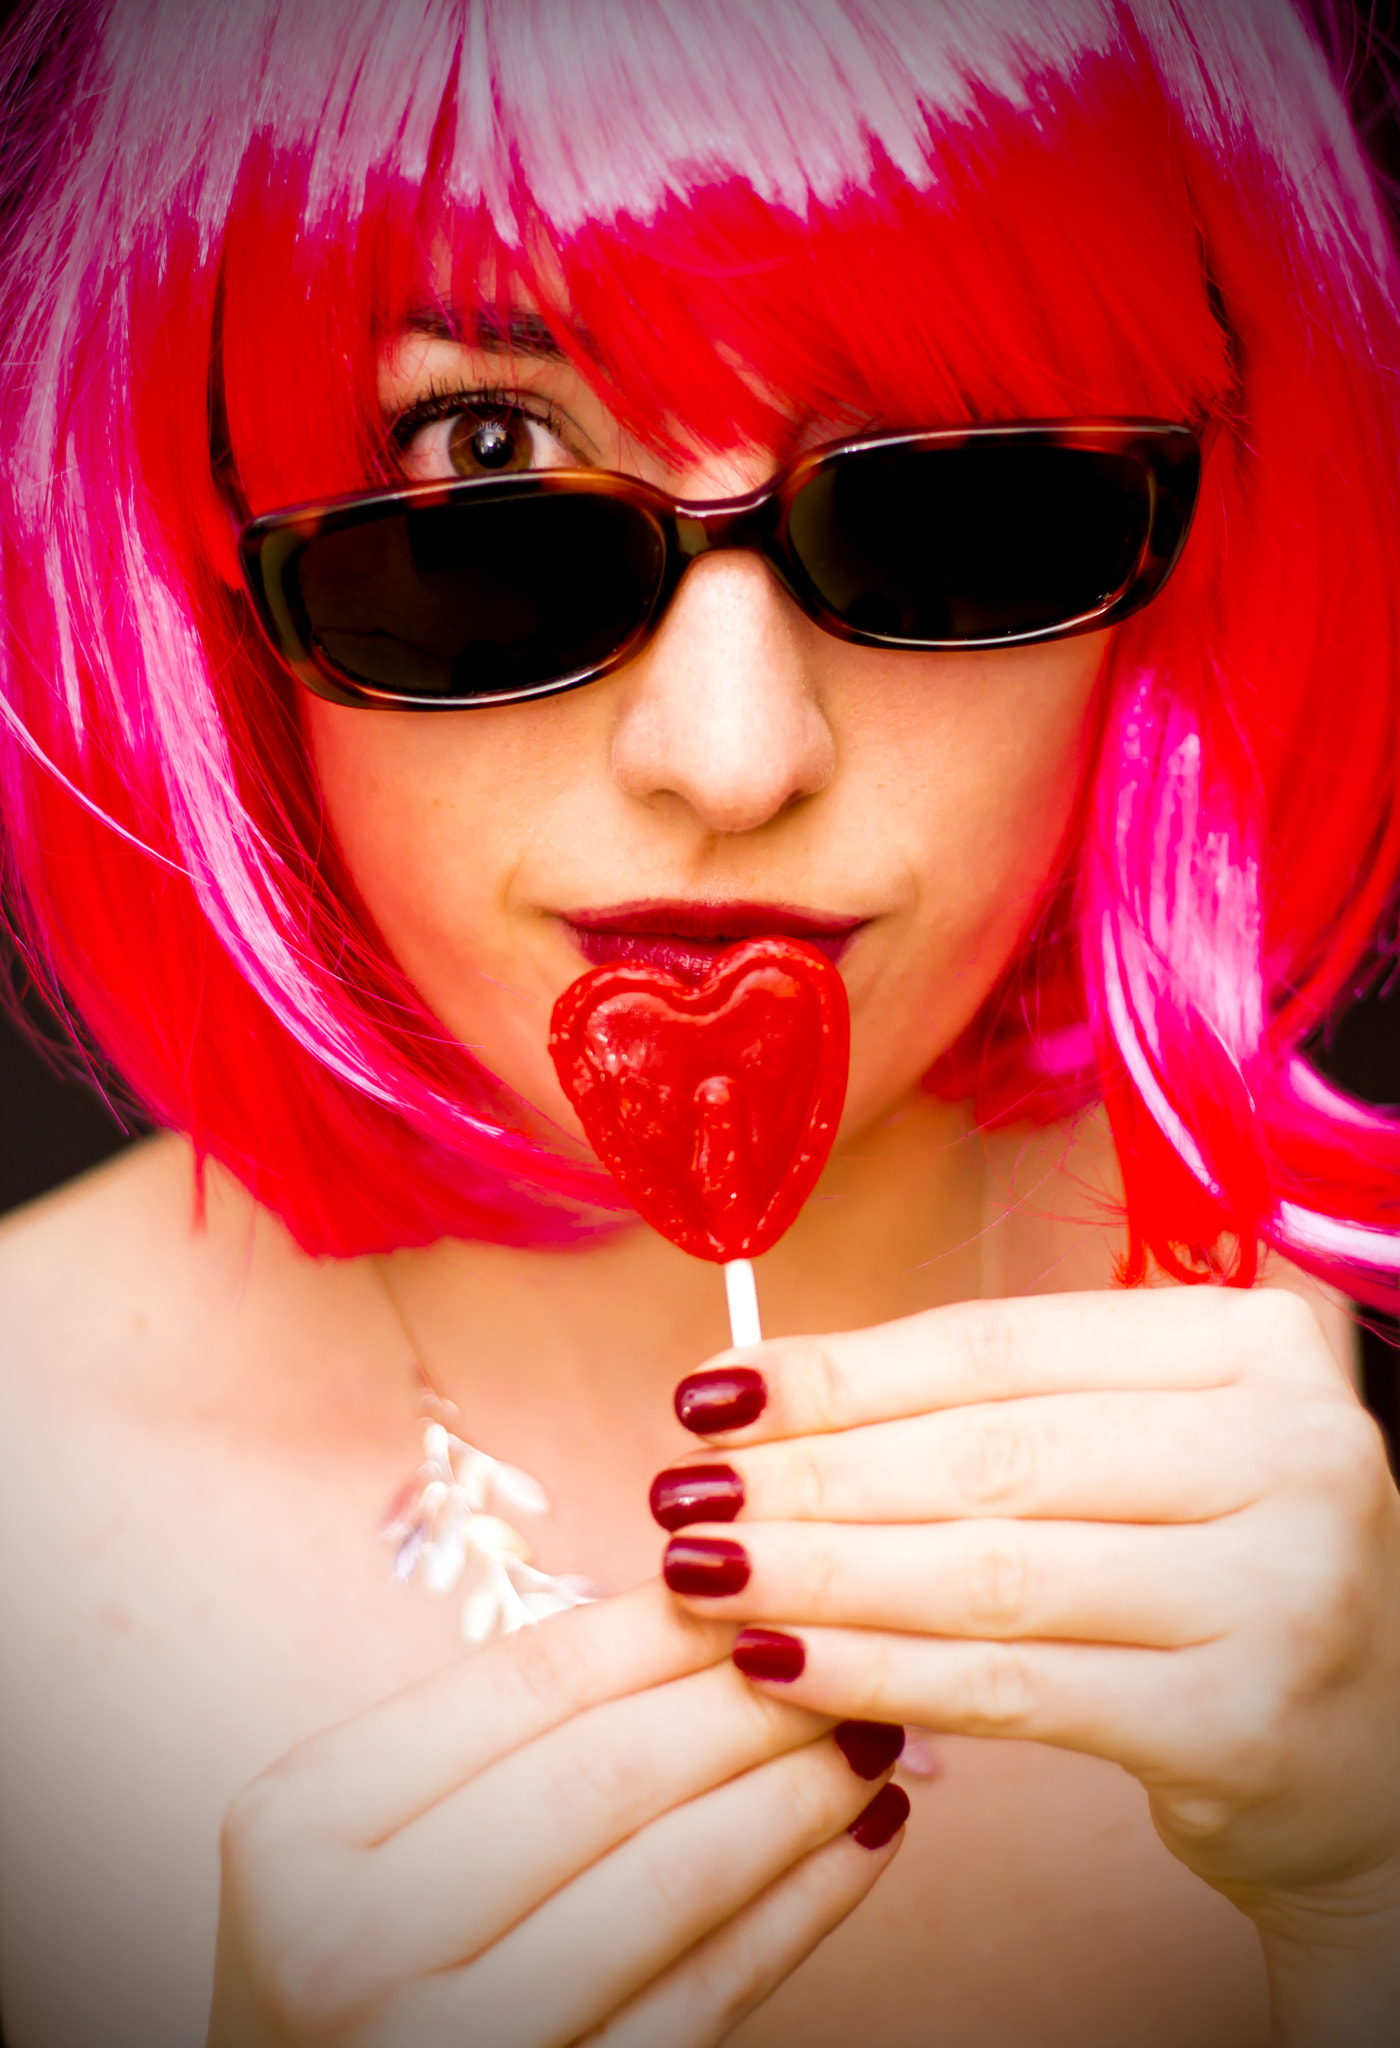 Nikon D7100 sample photo. Pretty girl eating a heart-shaped candy photography